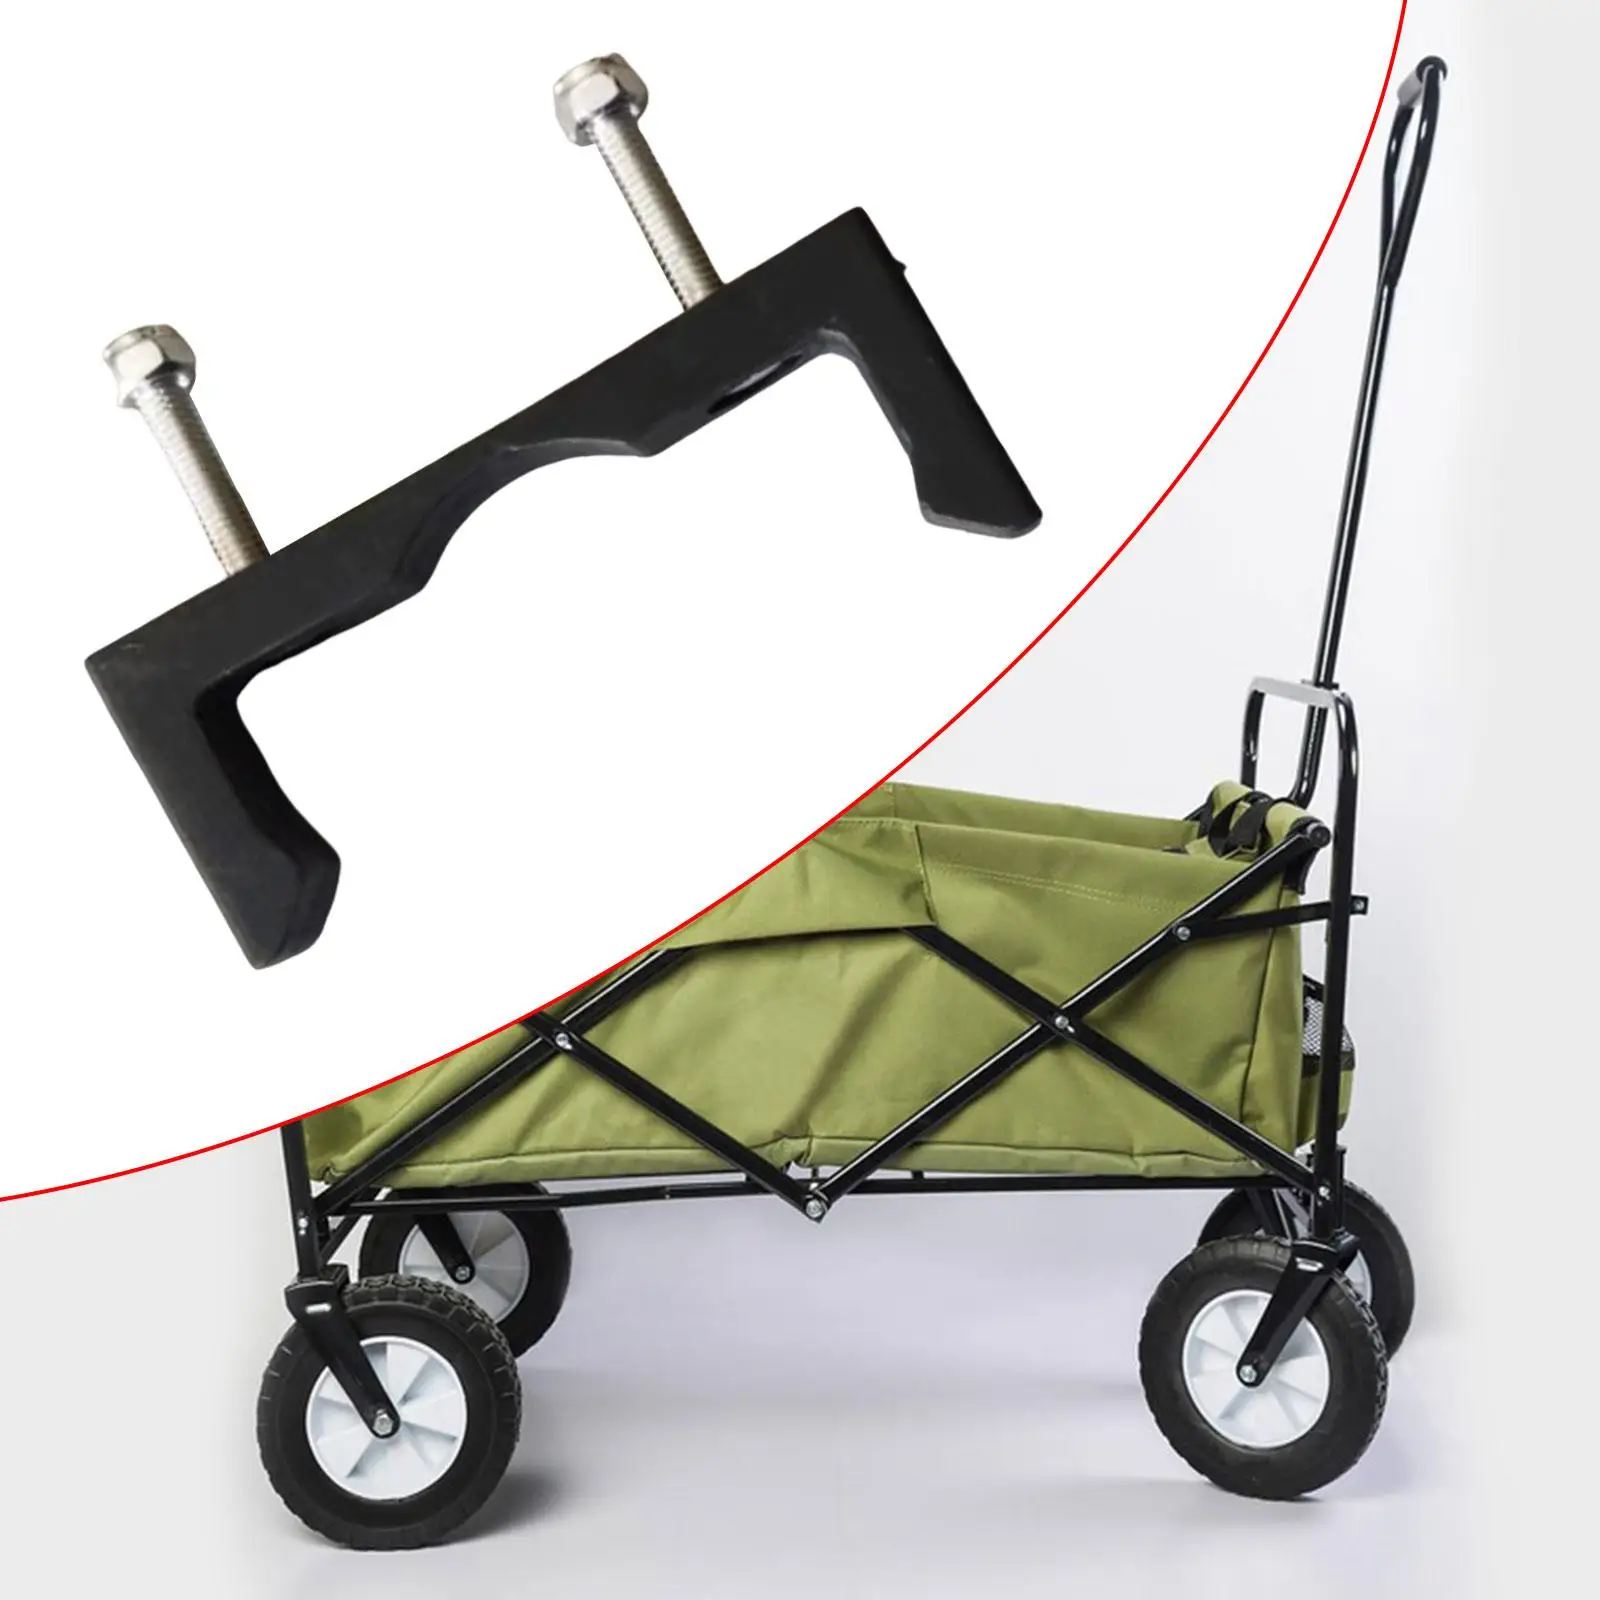 Collapsible Wagon Cart Pull Push Handle Fixed Buckle Folding Wagon Cart Fixed Buckle for Garden Shopping Outdoor Camping Fishing